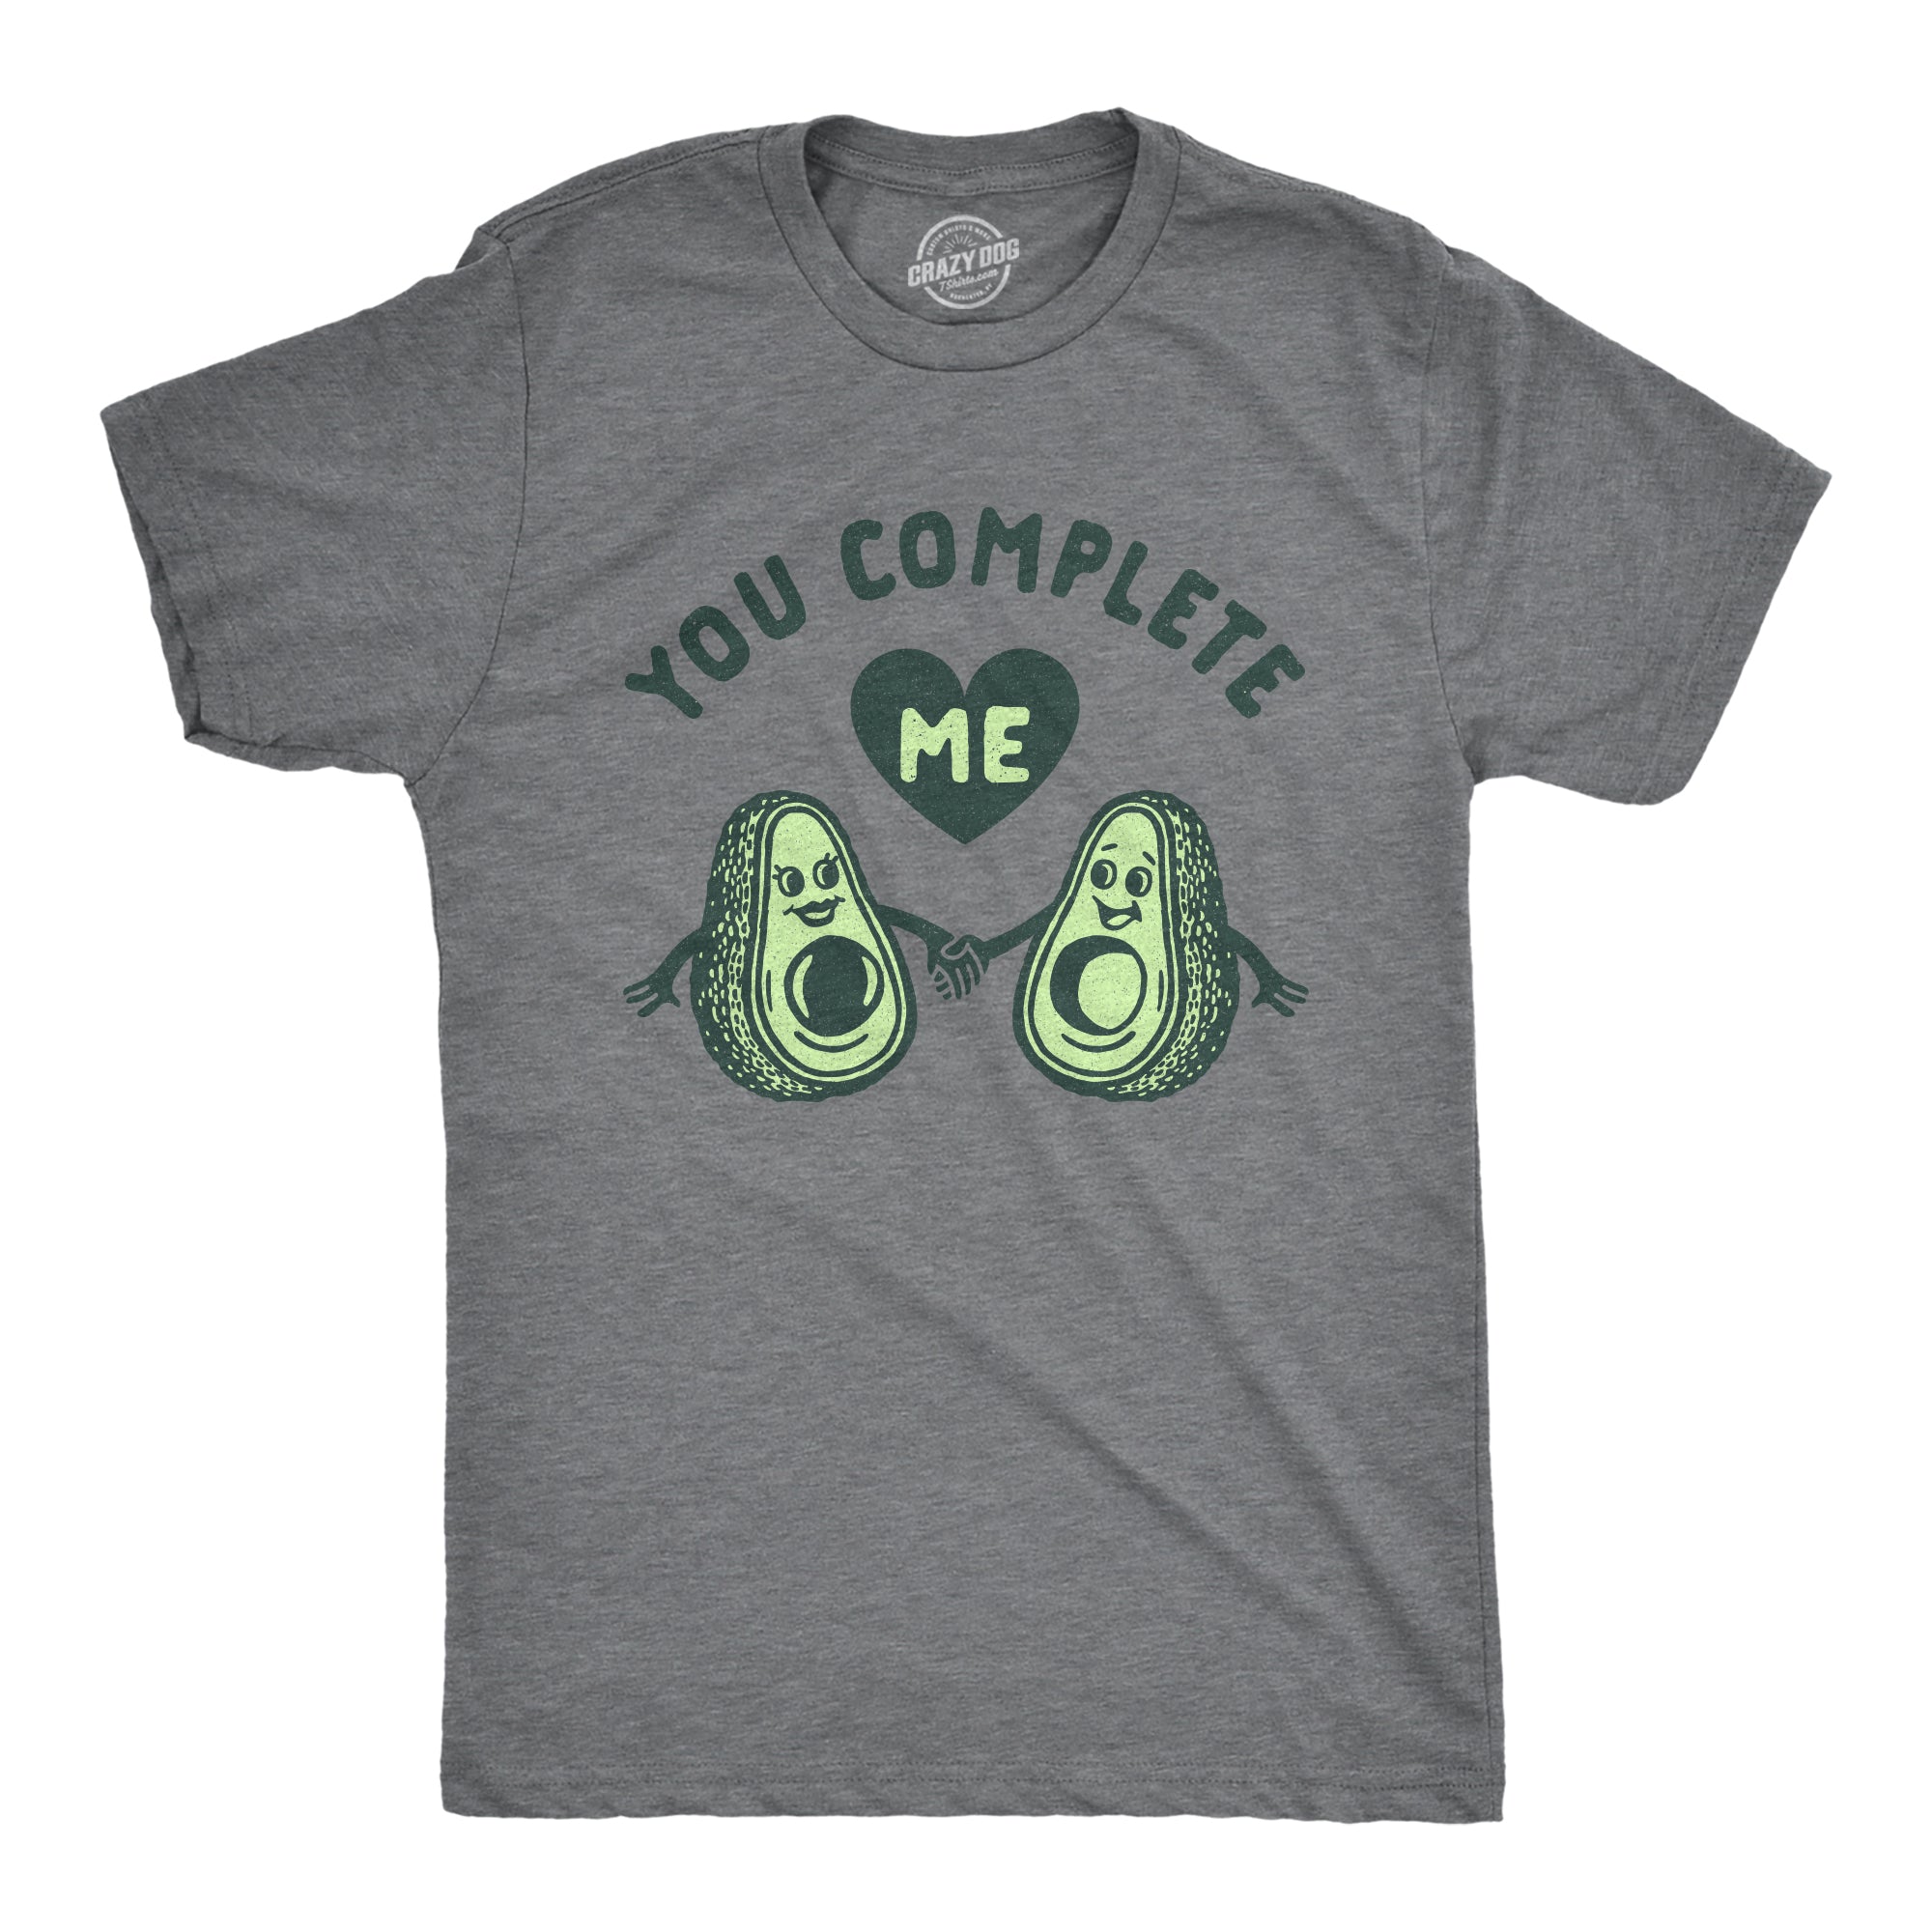 Funny Dark Heather Grey You Complete Me Avocados Mens T Shirt Nerdy Valentine's Day Food Tee